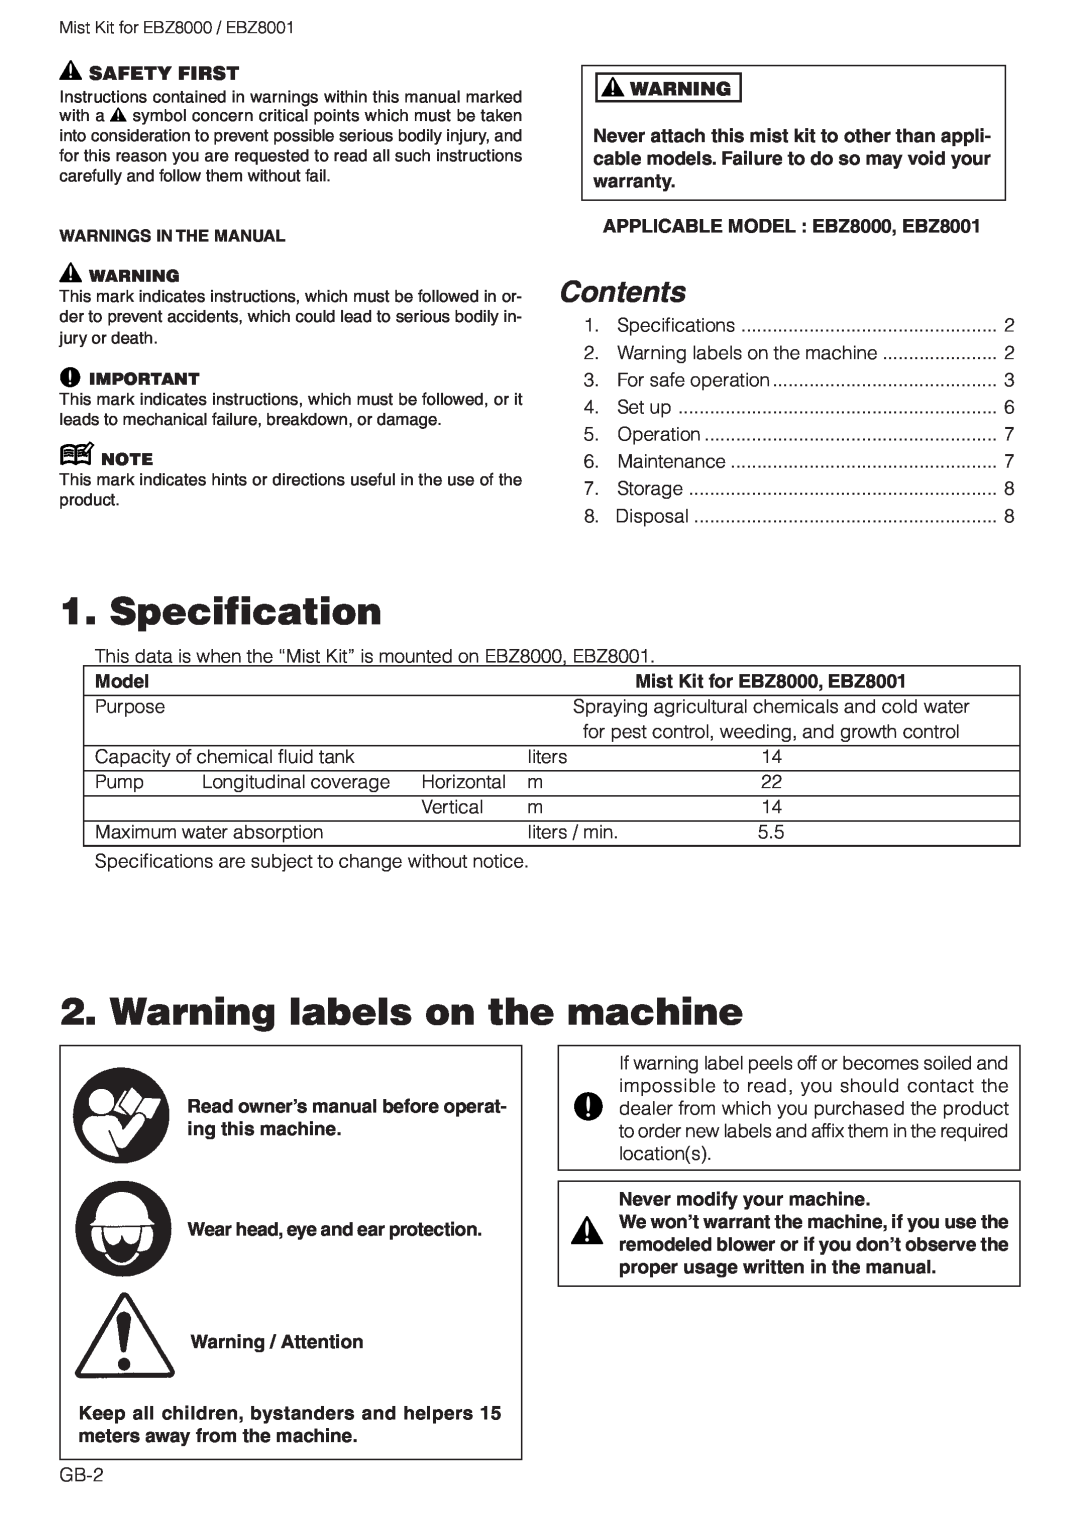 Zenoah Specification, Warning labels on the machine, Safety First, APPLICABLE MODEL EBZ8000, EBZ8001, Model, Contents 